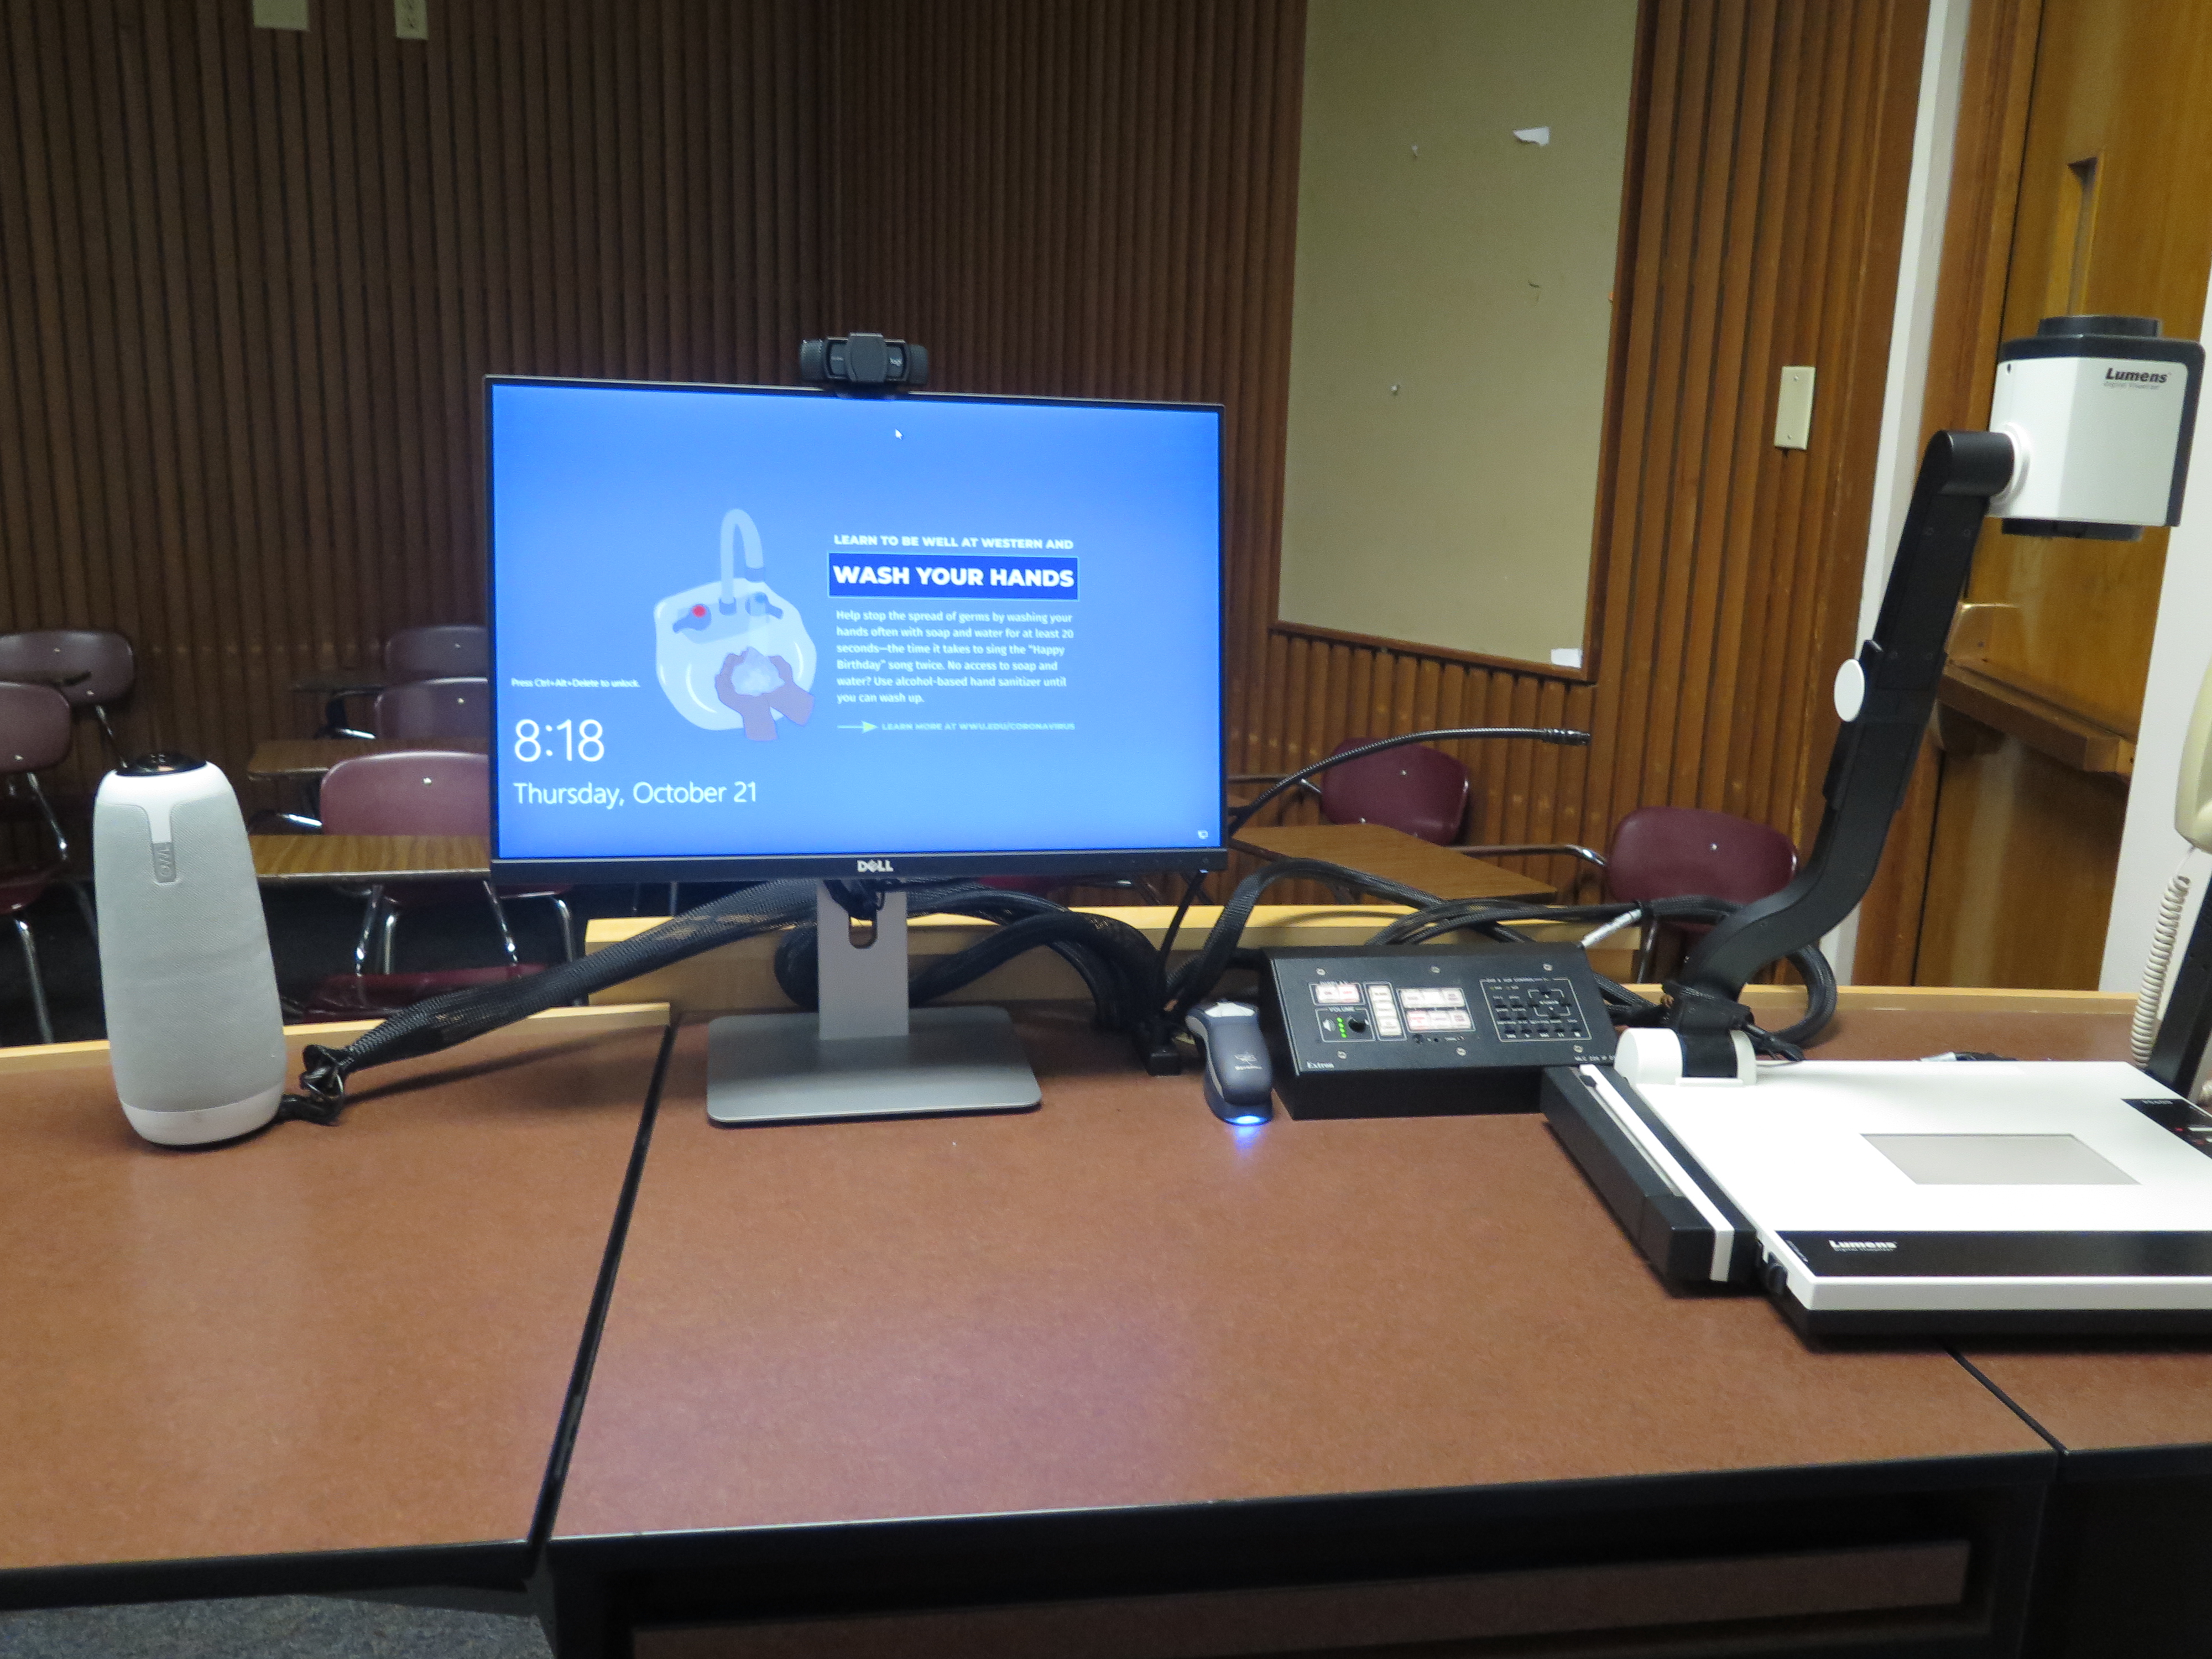 Top of the podium has a Lumens document camera, Dell PC Monitor, AV push button Controller, Owl Camera, and a Logitech Webcam